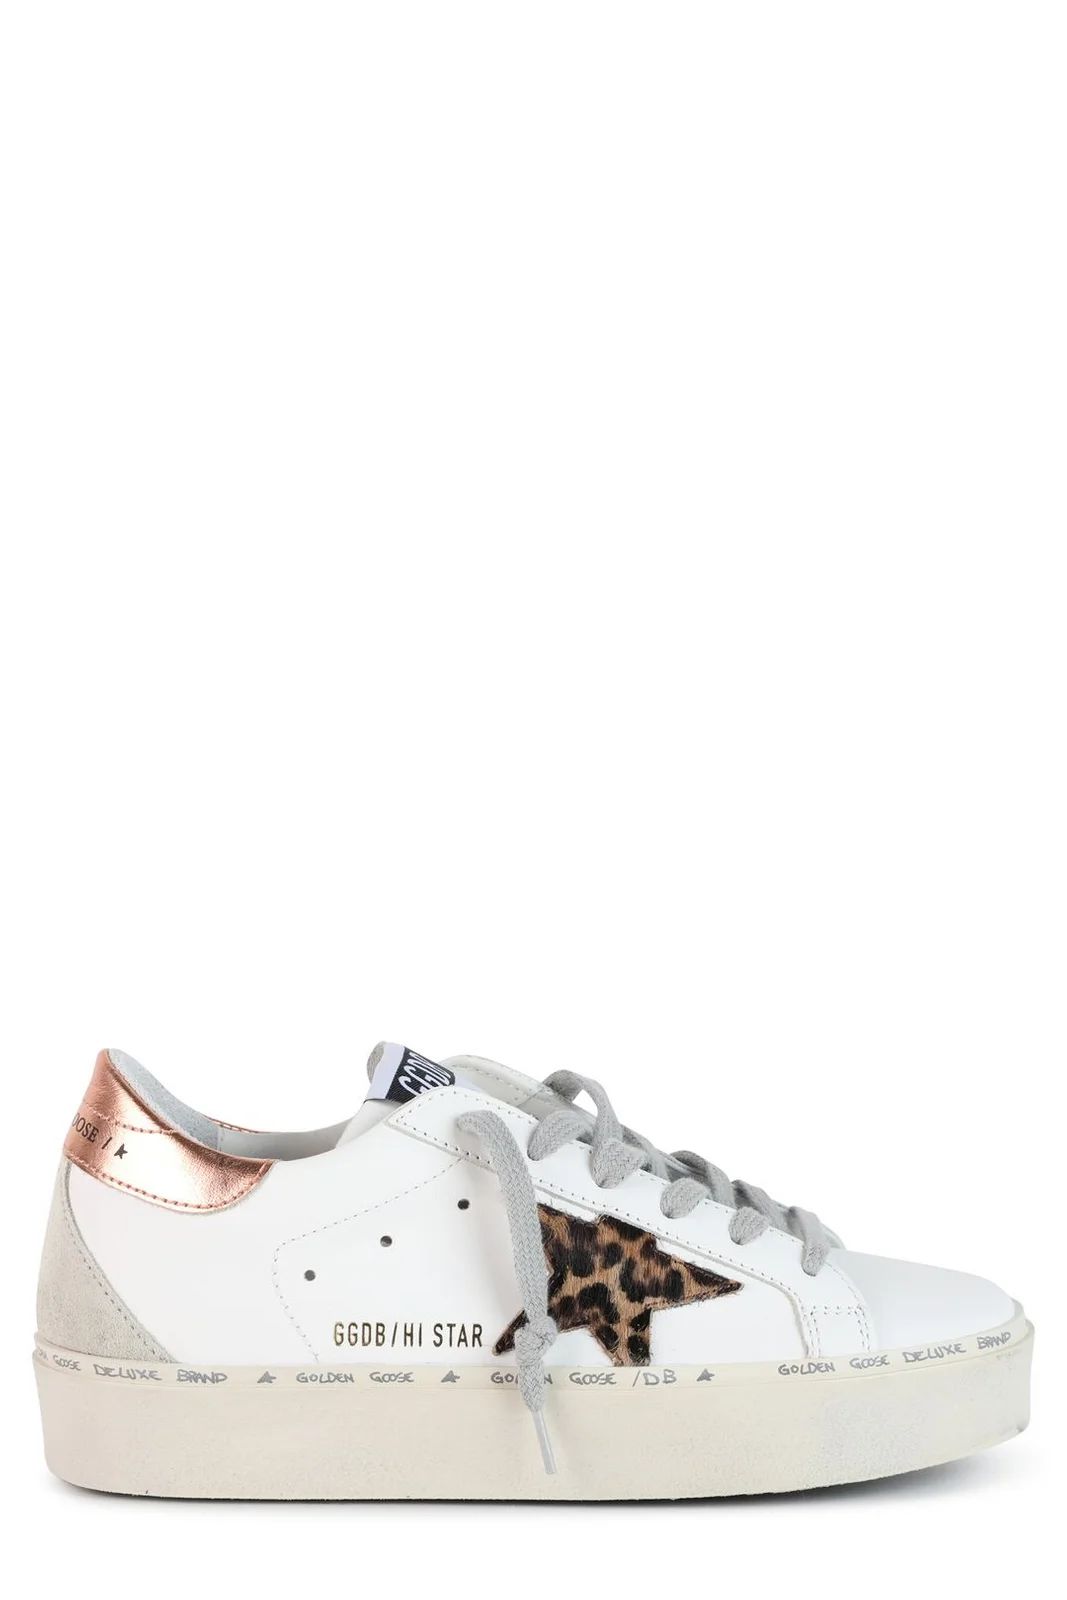 Golden Goose Deluxe Brand Hi-Star Lace-Up Sneakers | Cettire Global